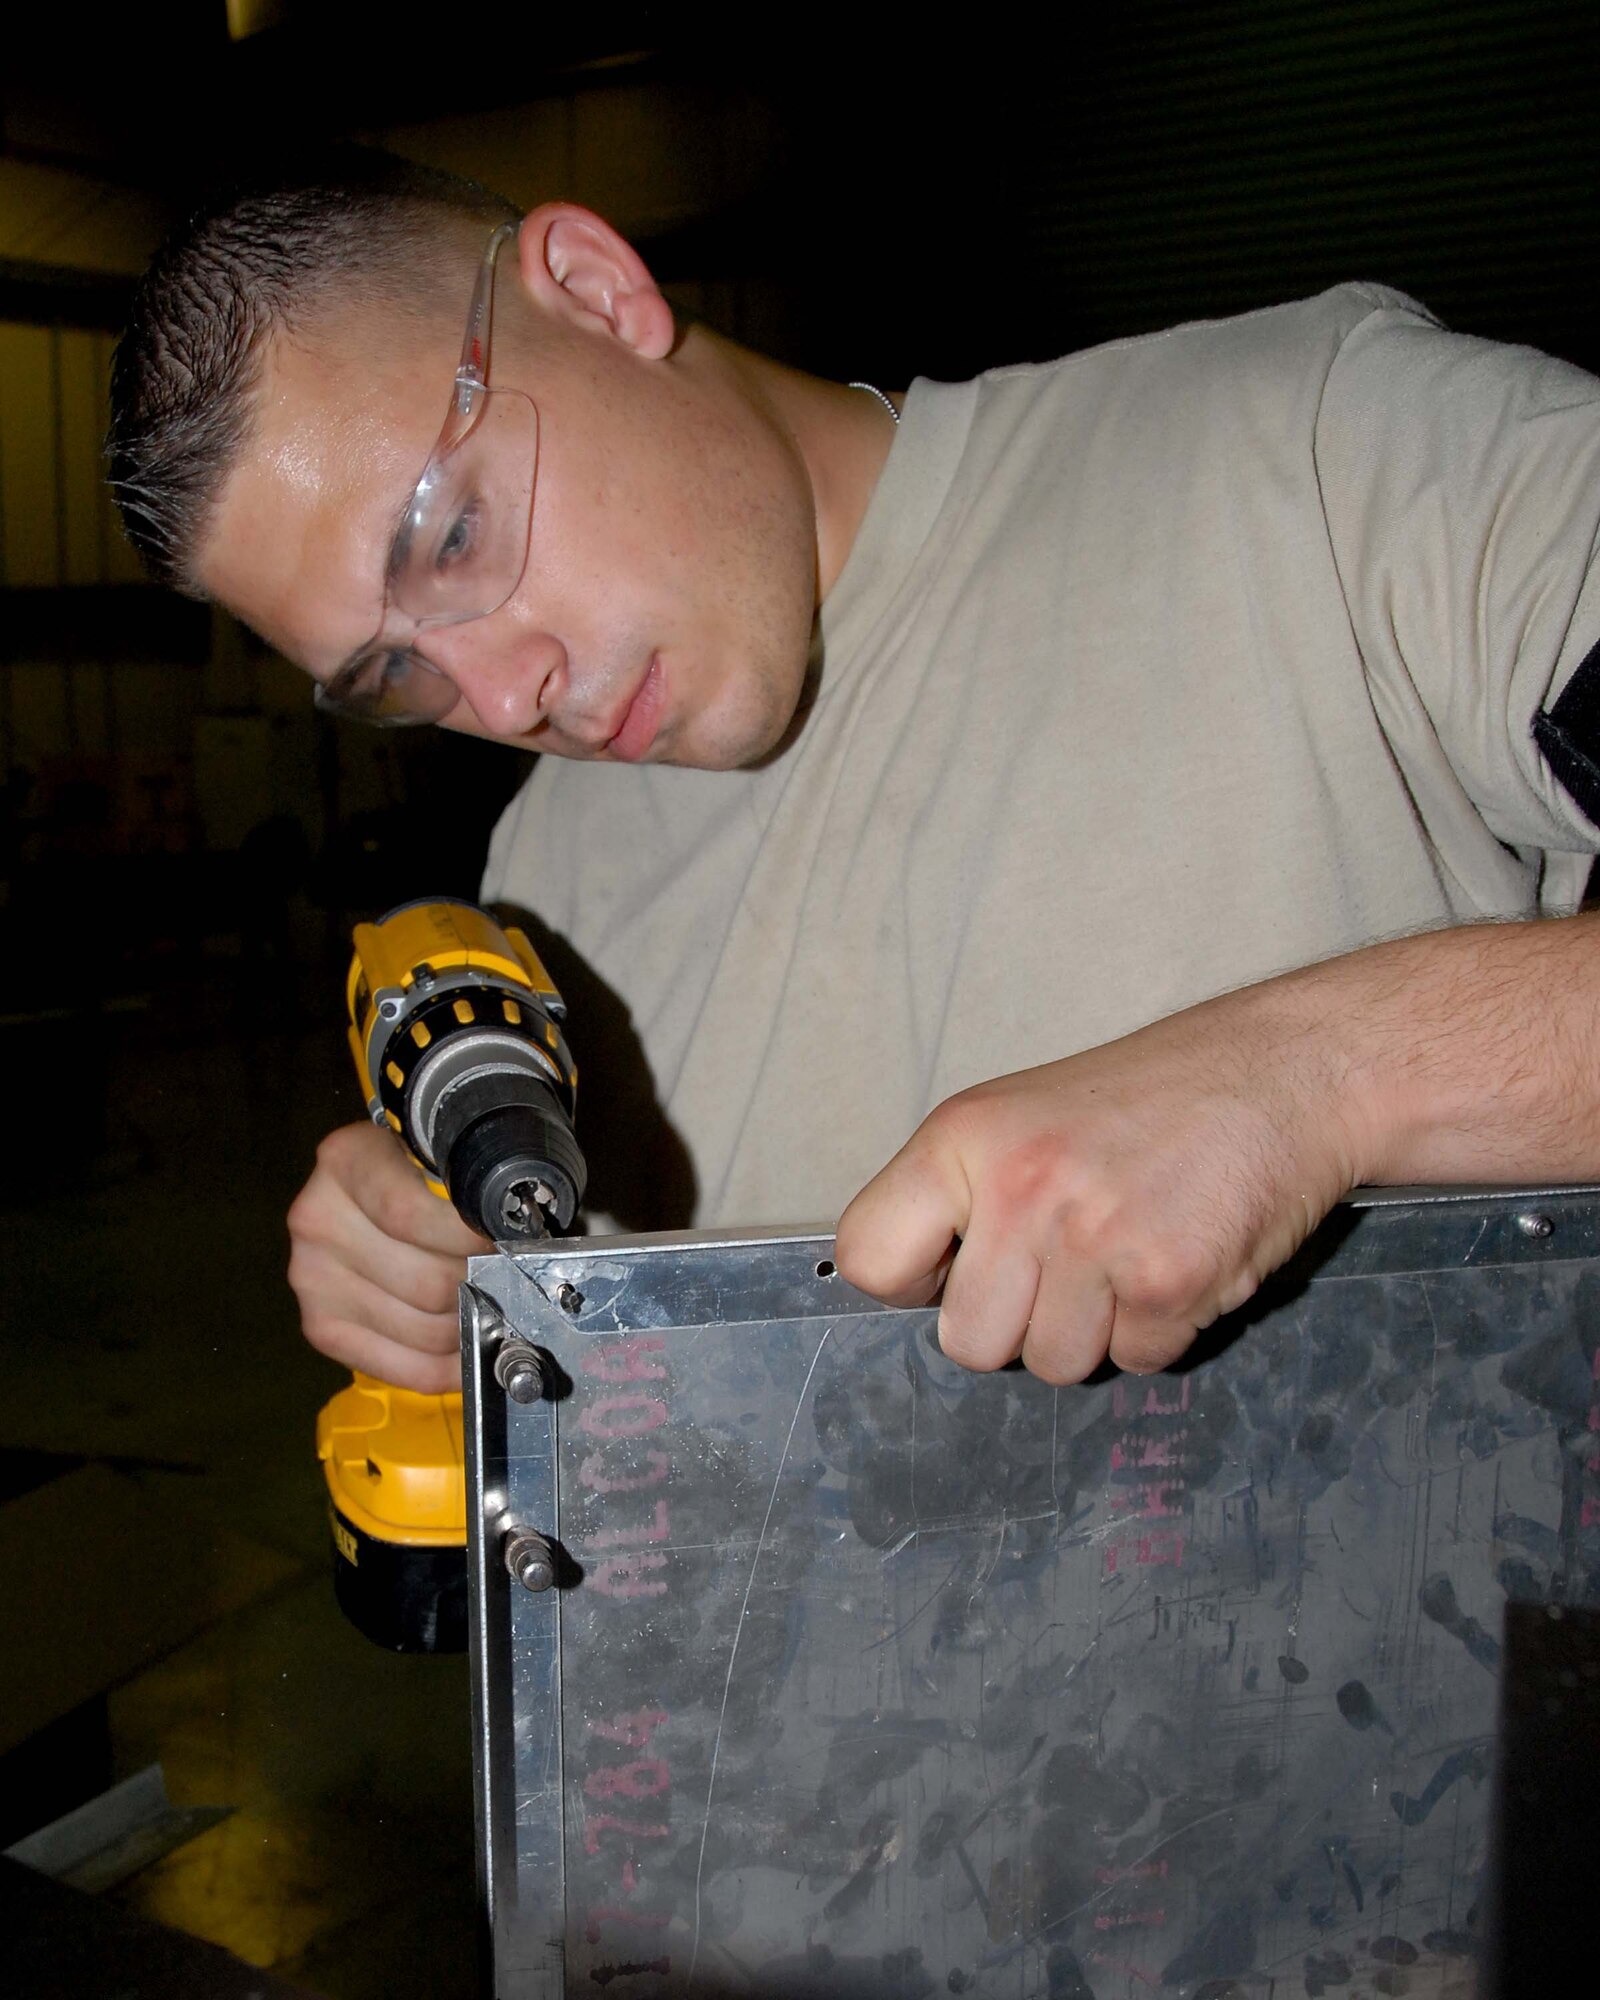 SOUTHWEST ASIA -- Senior Airman Jesse Spears drills holes to house rivets for shelving in the fabrication shop here Oct. 7. Airman Spears is an aircraft structural maintenance journeyman with the 380th Expeditionary Aircraft Maintenance Squadron. Airman Spears is deployed from Tinker Air Force Base, Okla. and calls Mascoutah, Ill., home. (U.S. Air Force photo by Tech. Sgt. Denise Johnson) (released)